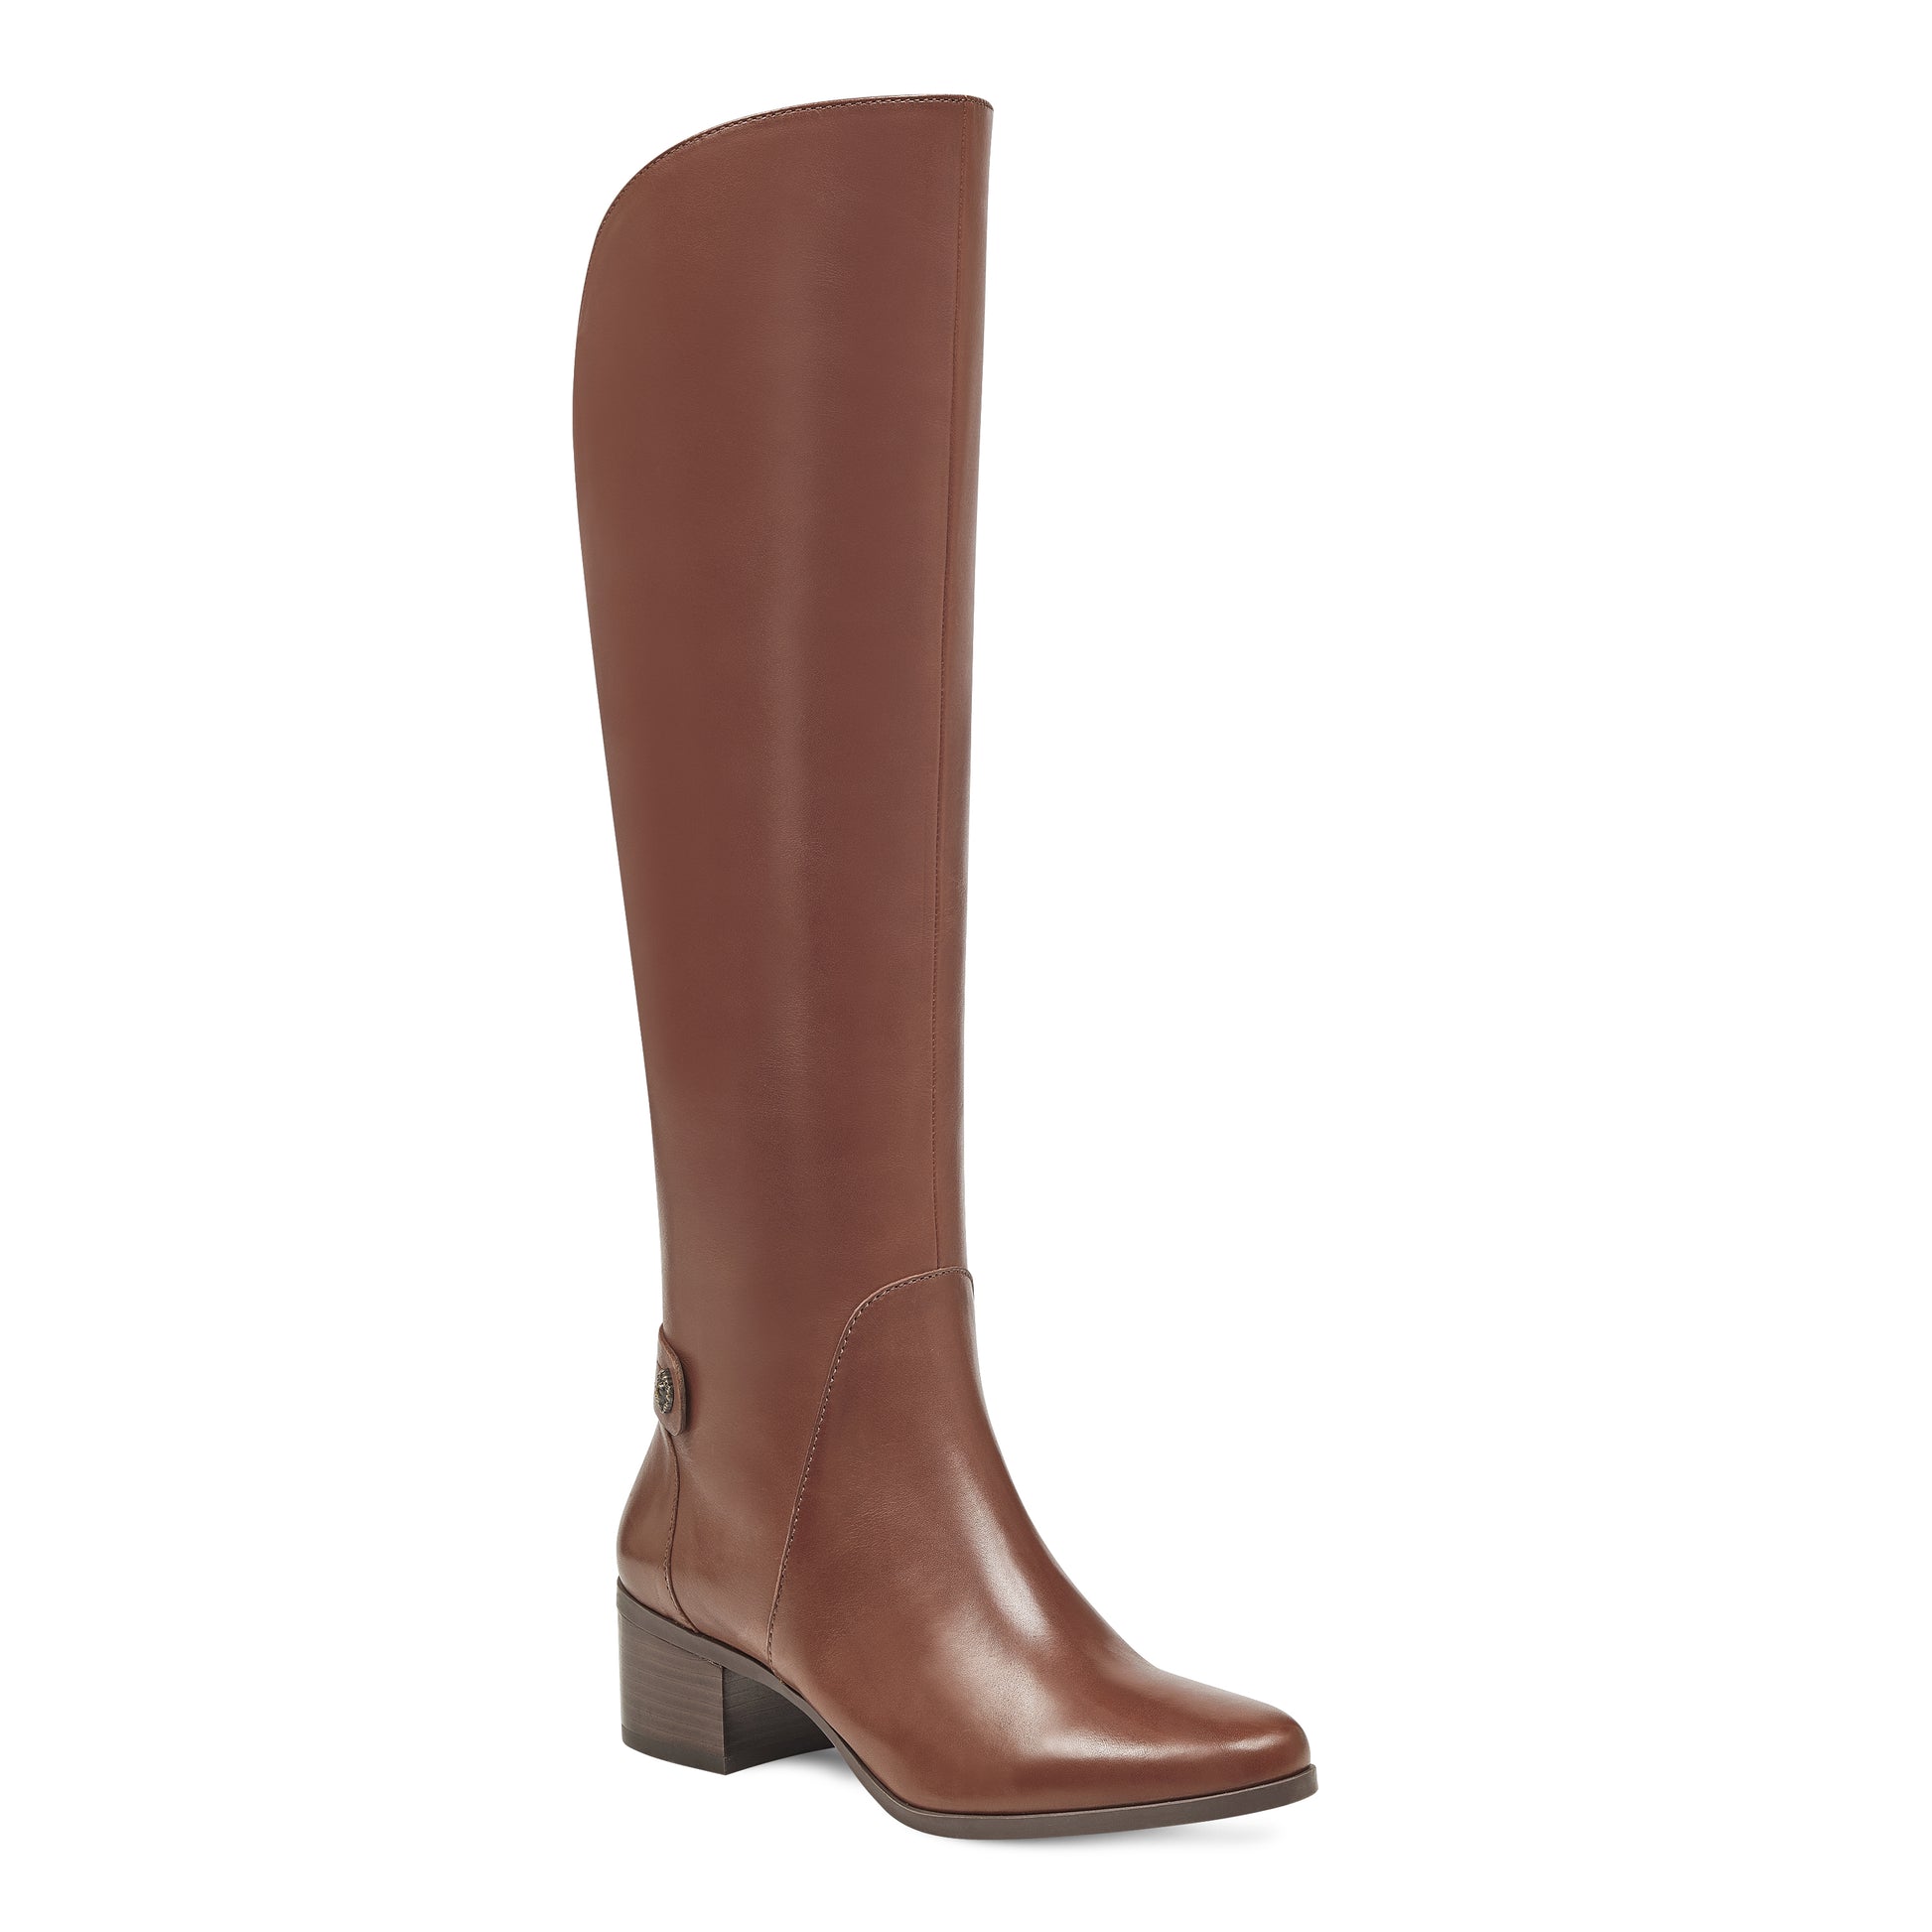 Embrace a modern silhouette that's sure to garner plenty of compliments with Anne Klein smooth leather Jela boot. Jela has a pull-on design with a half-zip closure at the side and a stretch panel at the back for added comfort. Jela's insole has dual, lightweight foam layers to provide cushioning and shock-absorption as well as a durable rubber outsole